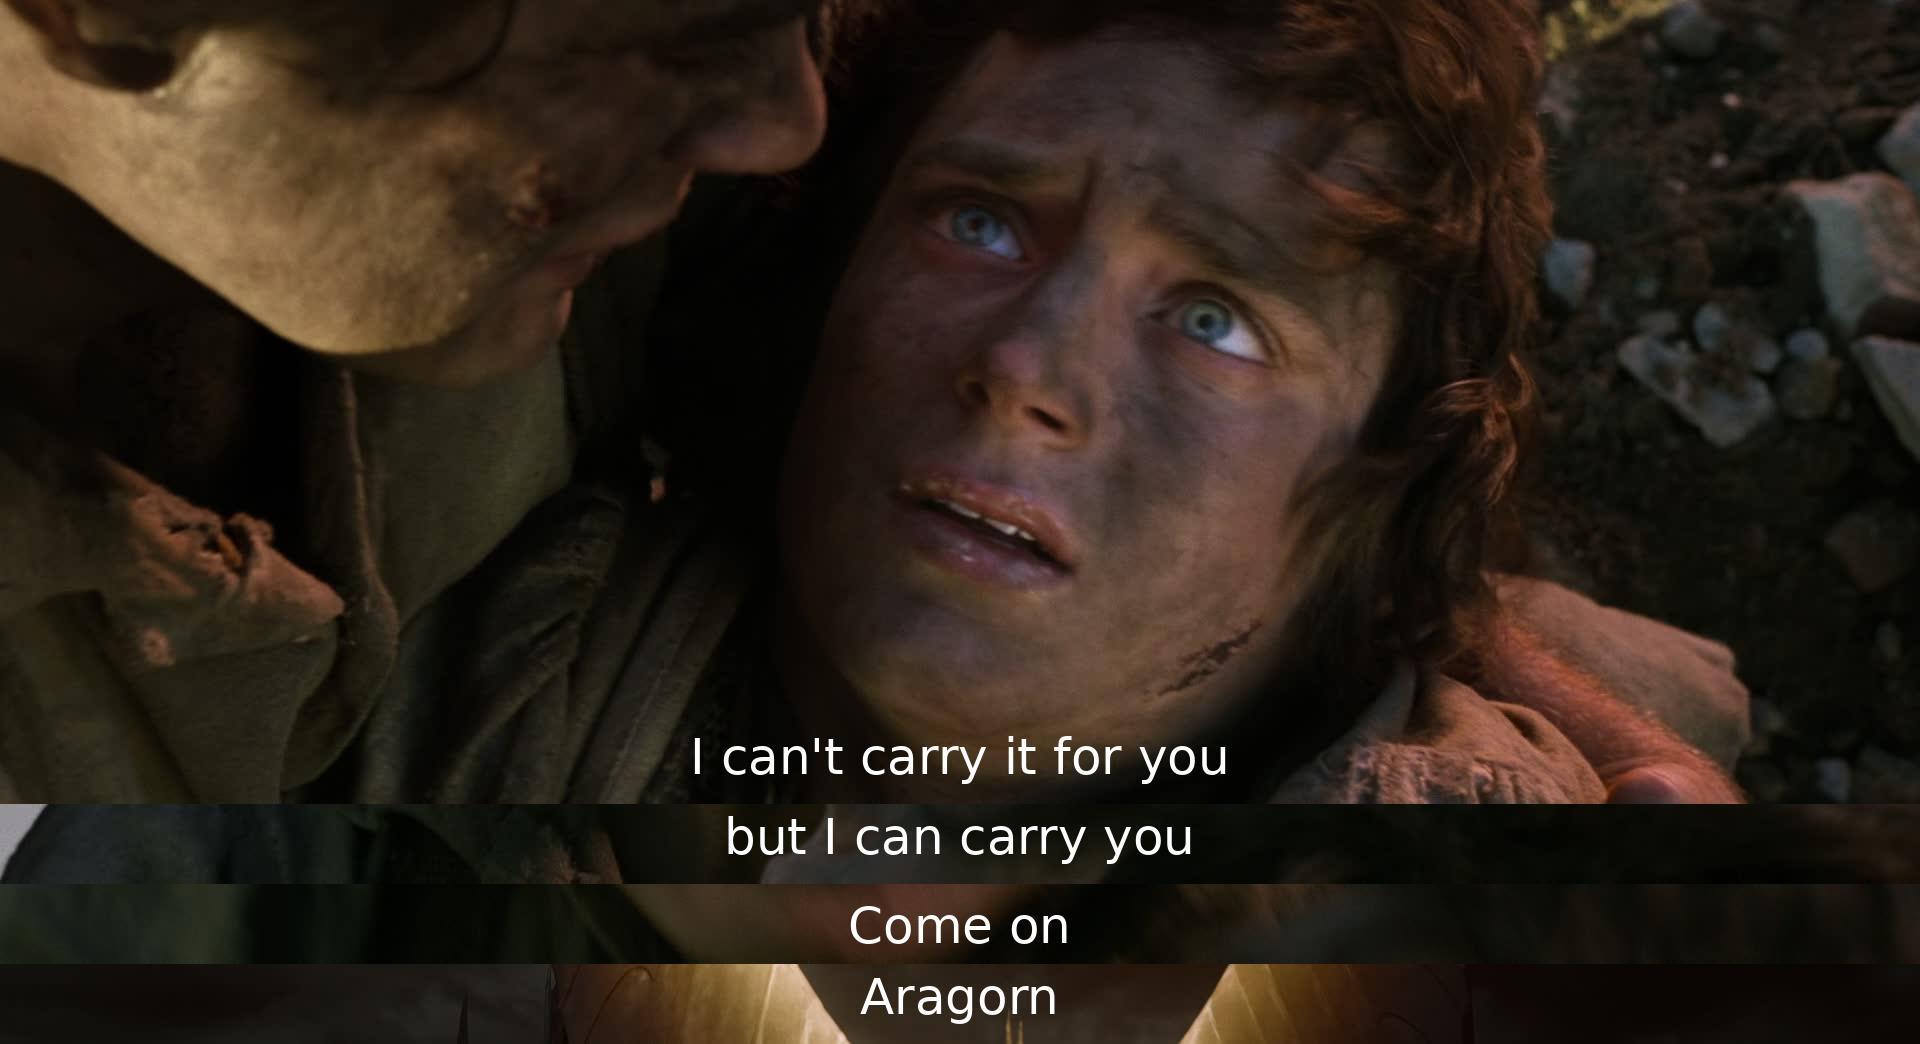 Aragorn encourages Frodo when he is struggling to carry the Ring, offering to carry Frodo instead. This powerful moment showcases the strength of their friendship and demonstrates the selflessness and support that Aragorn provides during Frodo's difficult journey.